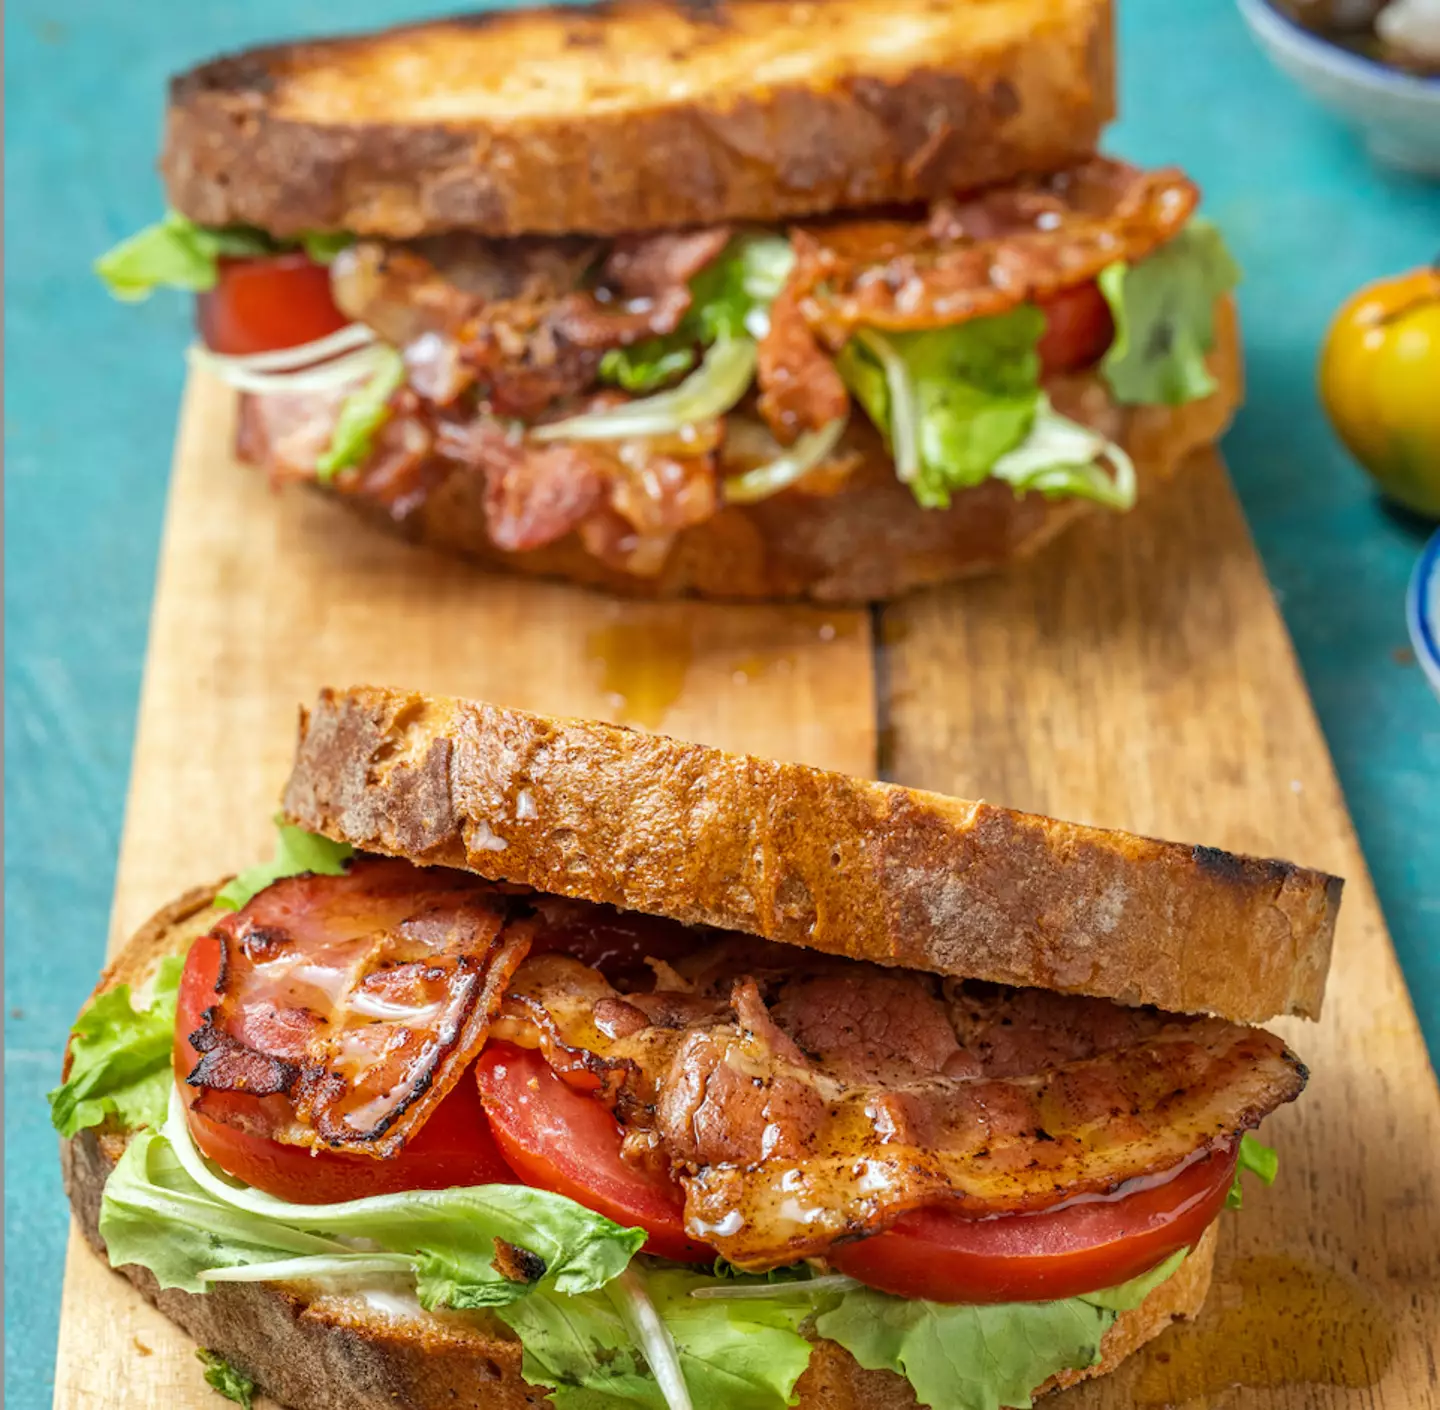 Would you pay almost $16 for a BLT?